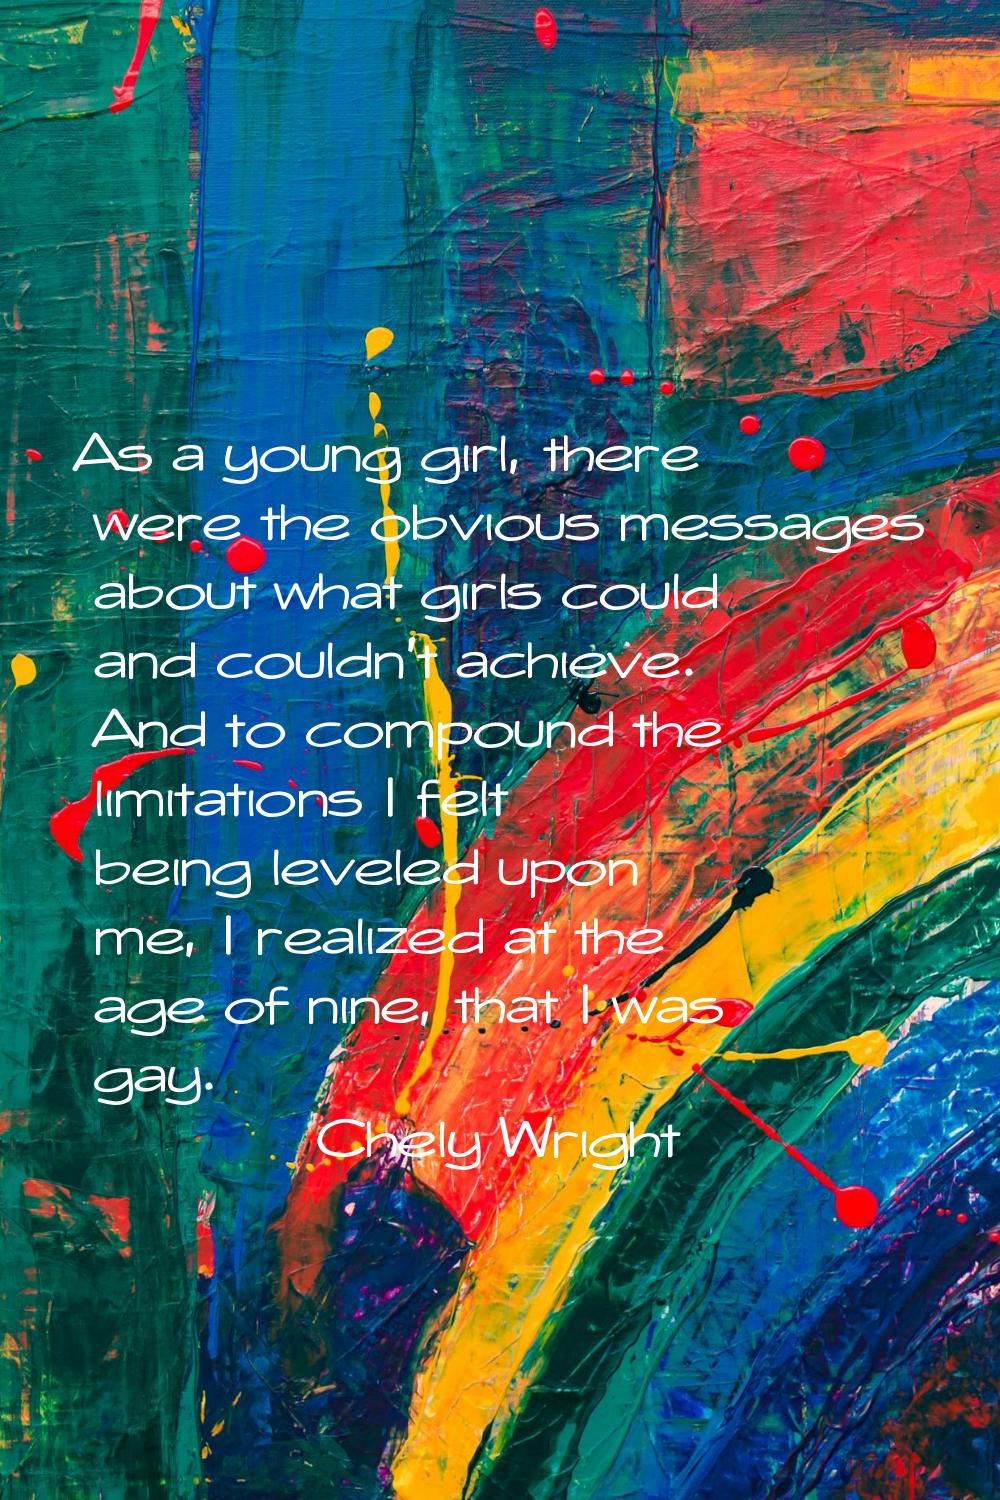 As a young girl, there were the obvious messages about what girls could and couldn't achieve. And t